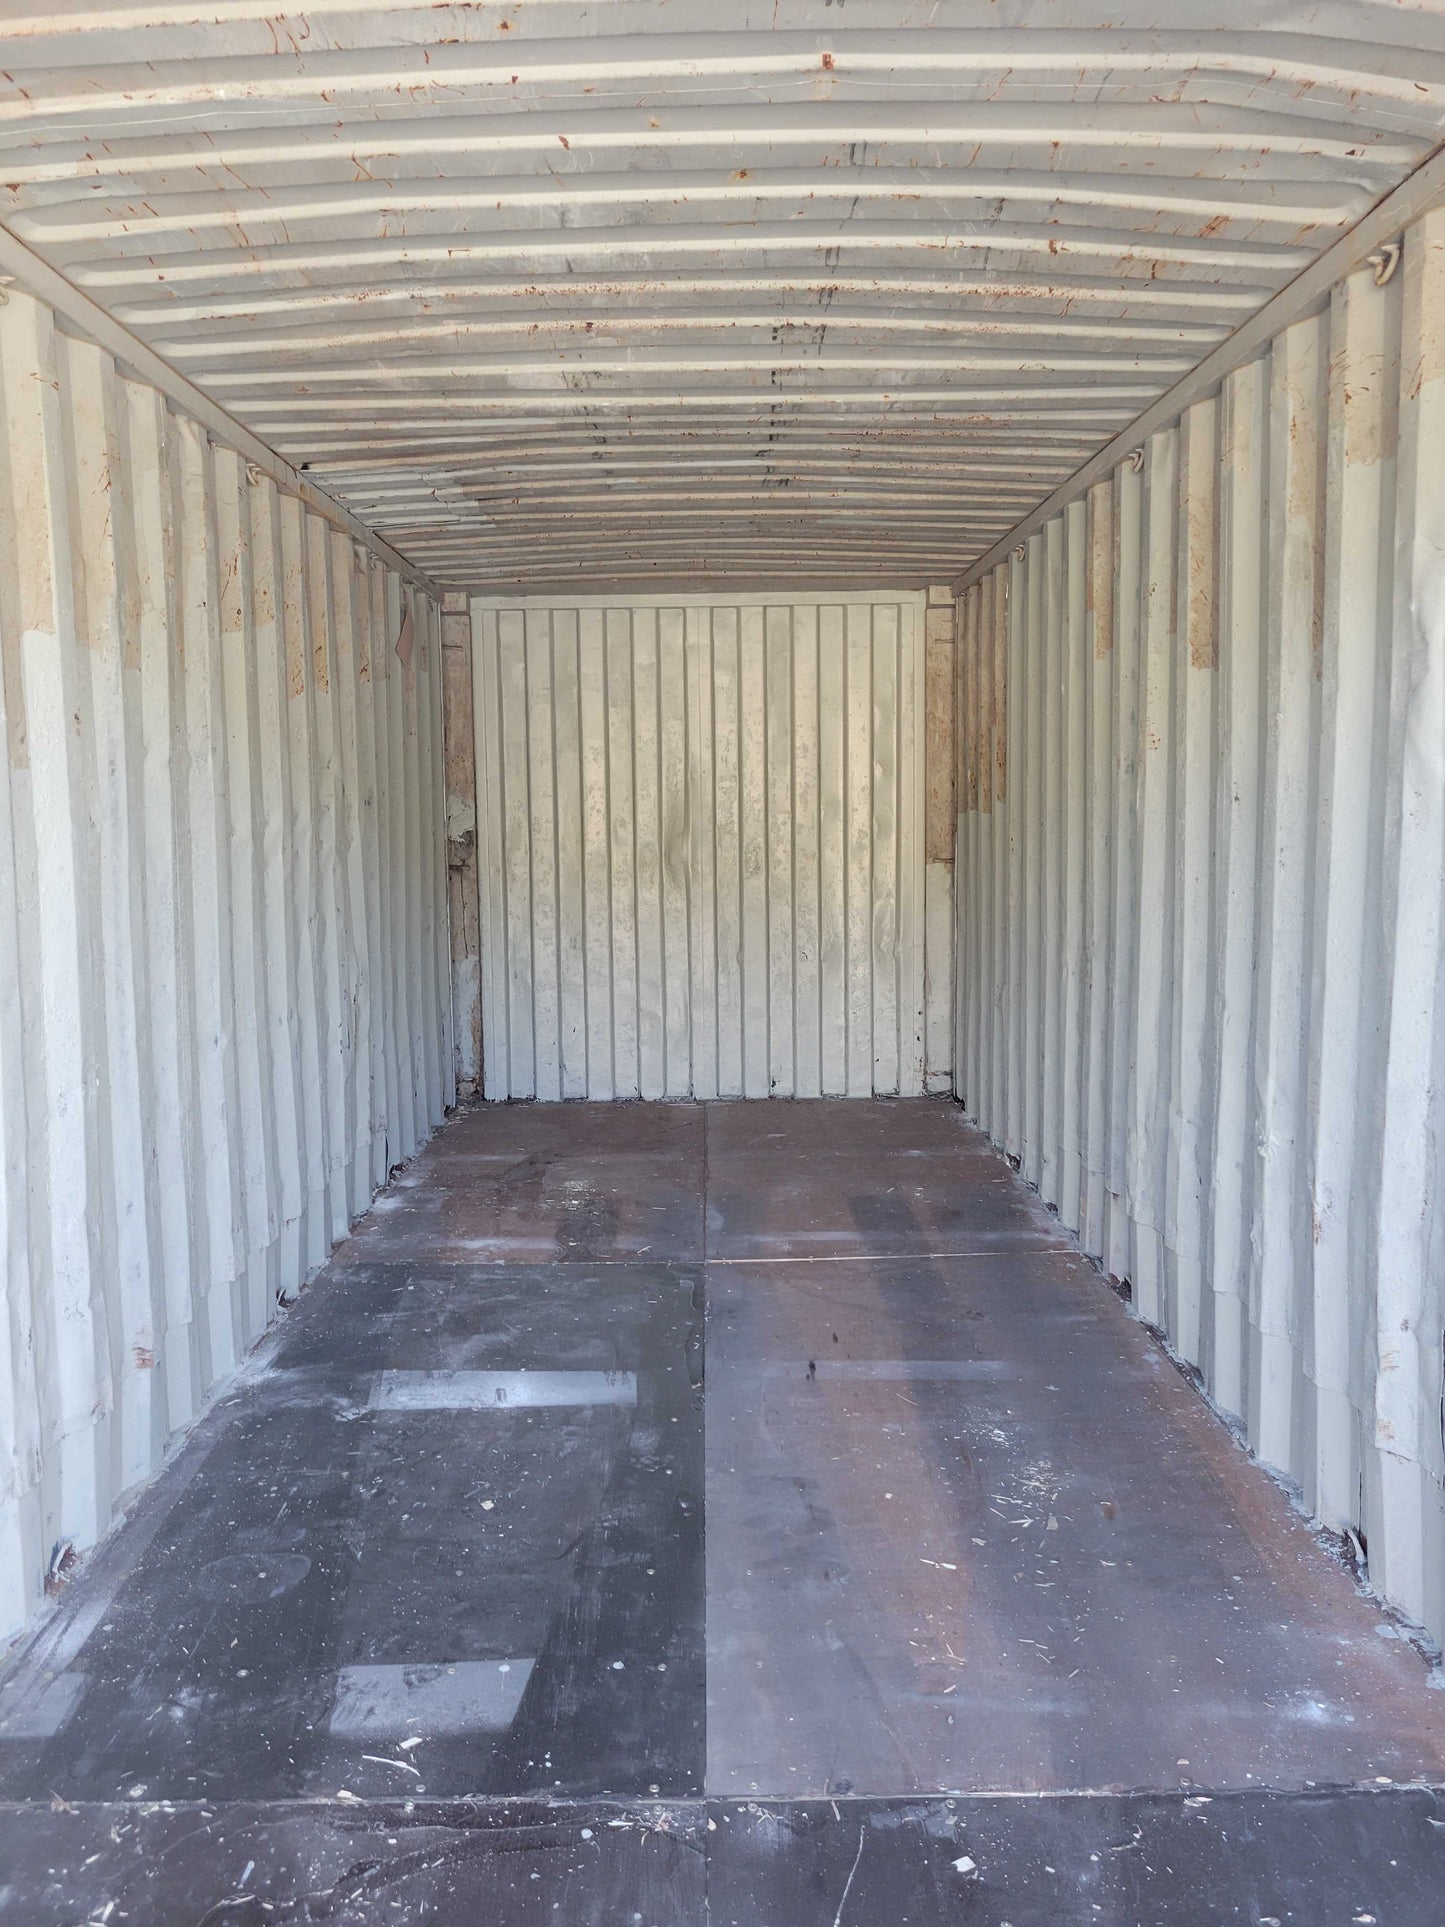 The Calamander wwt 20-ft shipping container - CAXU3315767